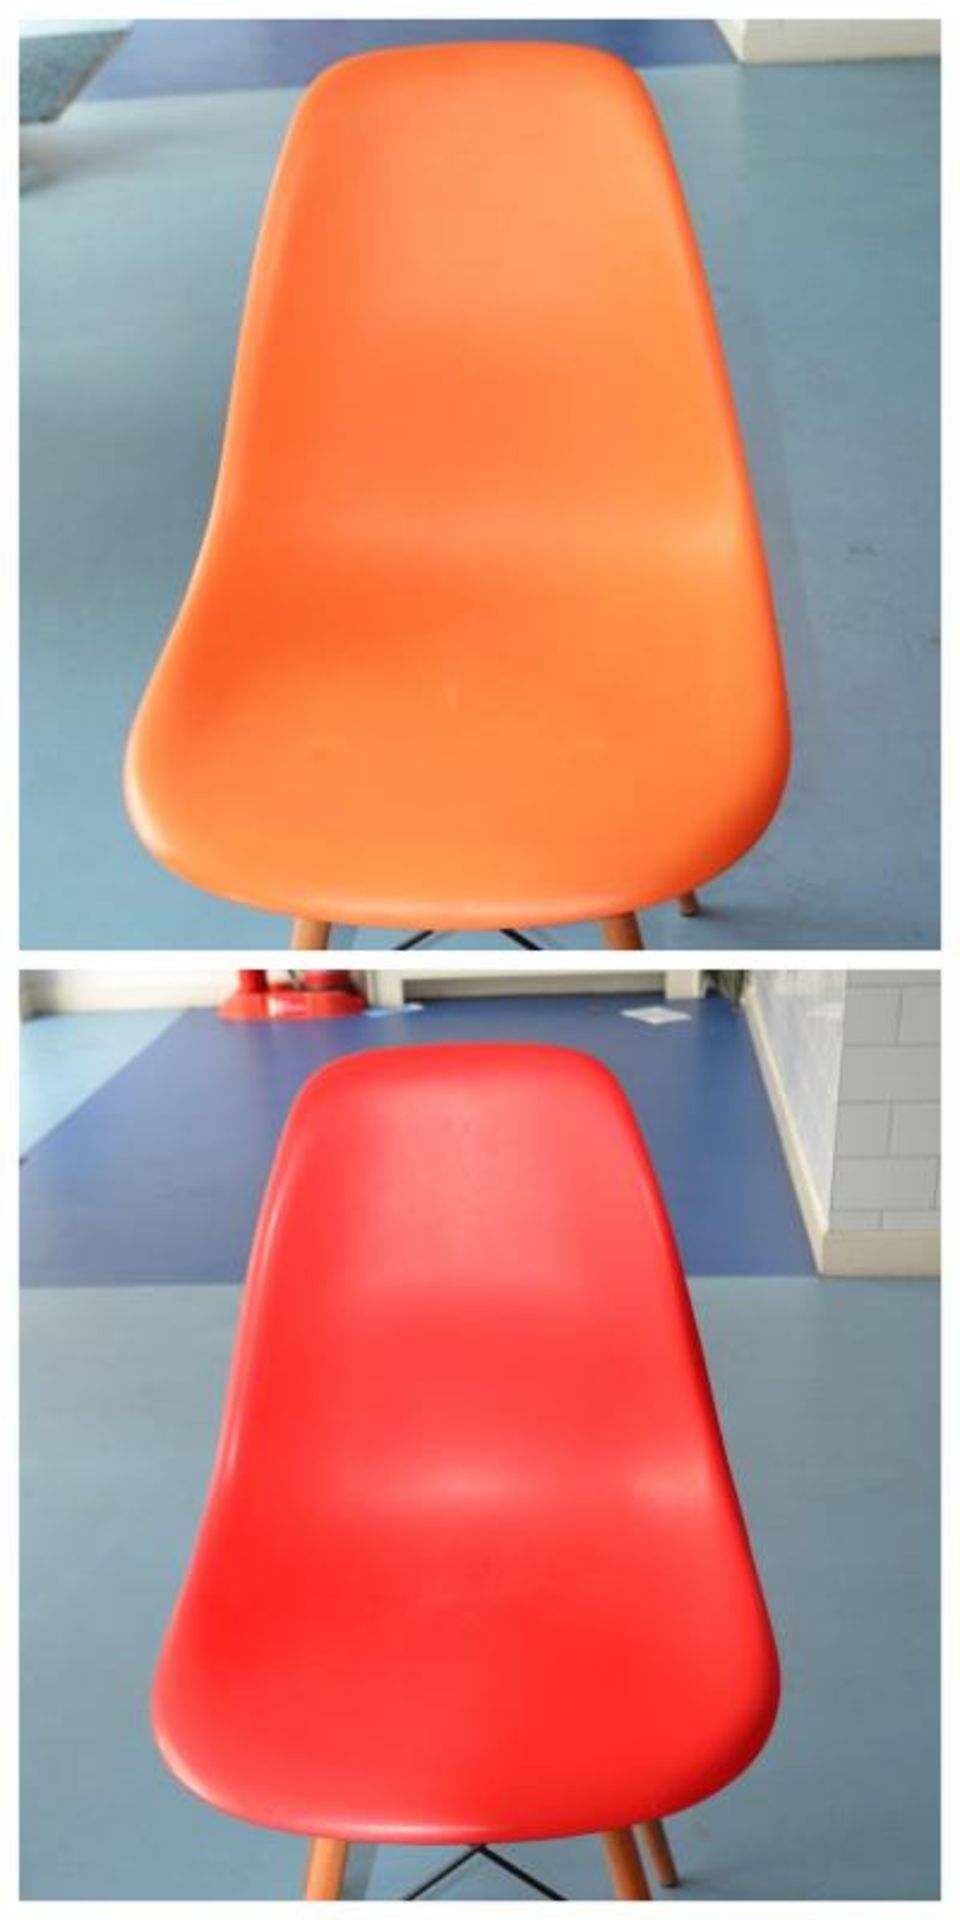 12 x Children's Orange and Red Charles and Ray Eames Style Shell Chairs - CL425 - Location: Altrinch